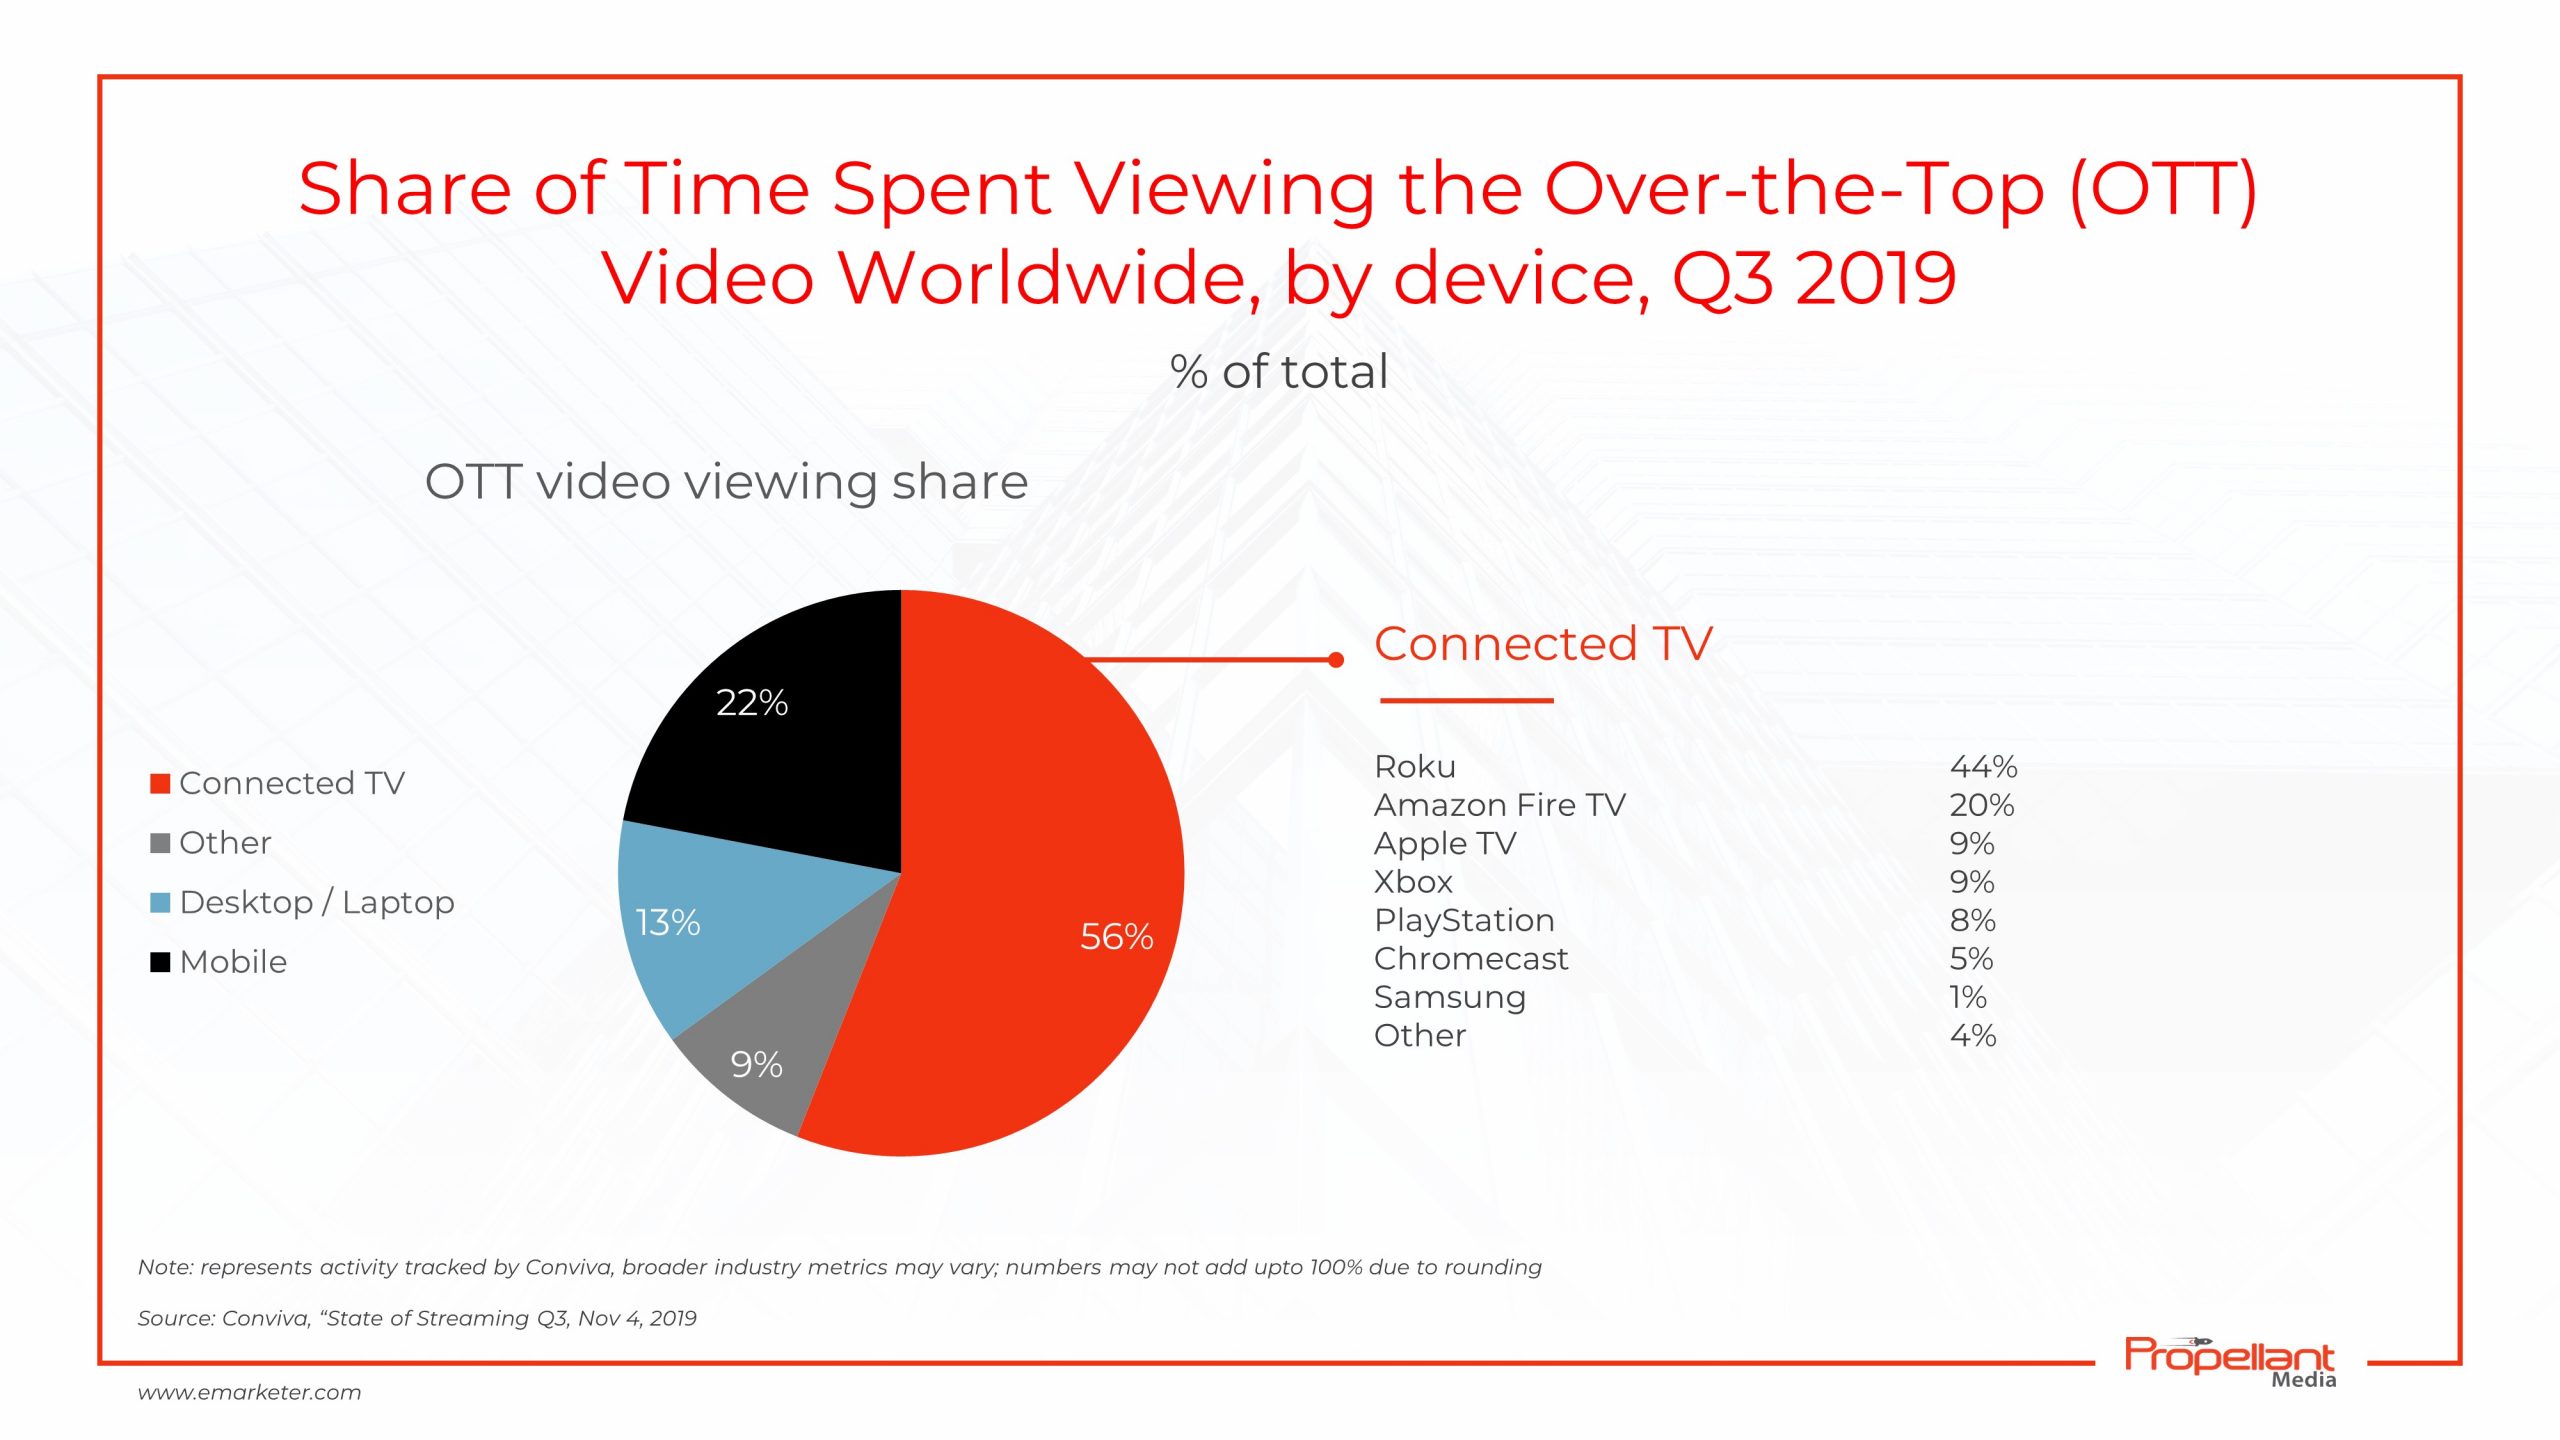 share of time spent viewing ott video